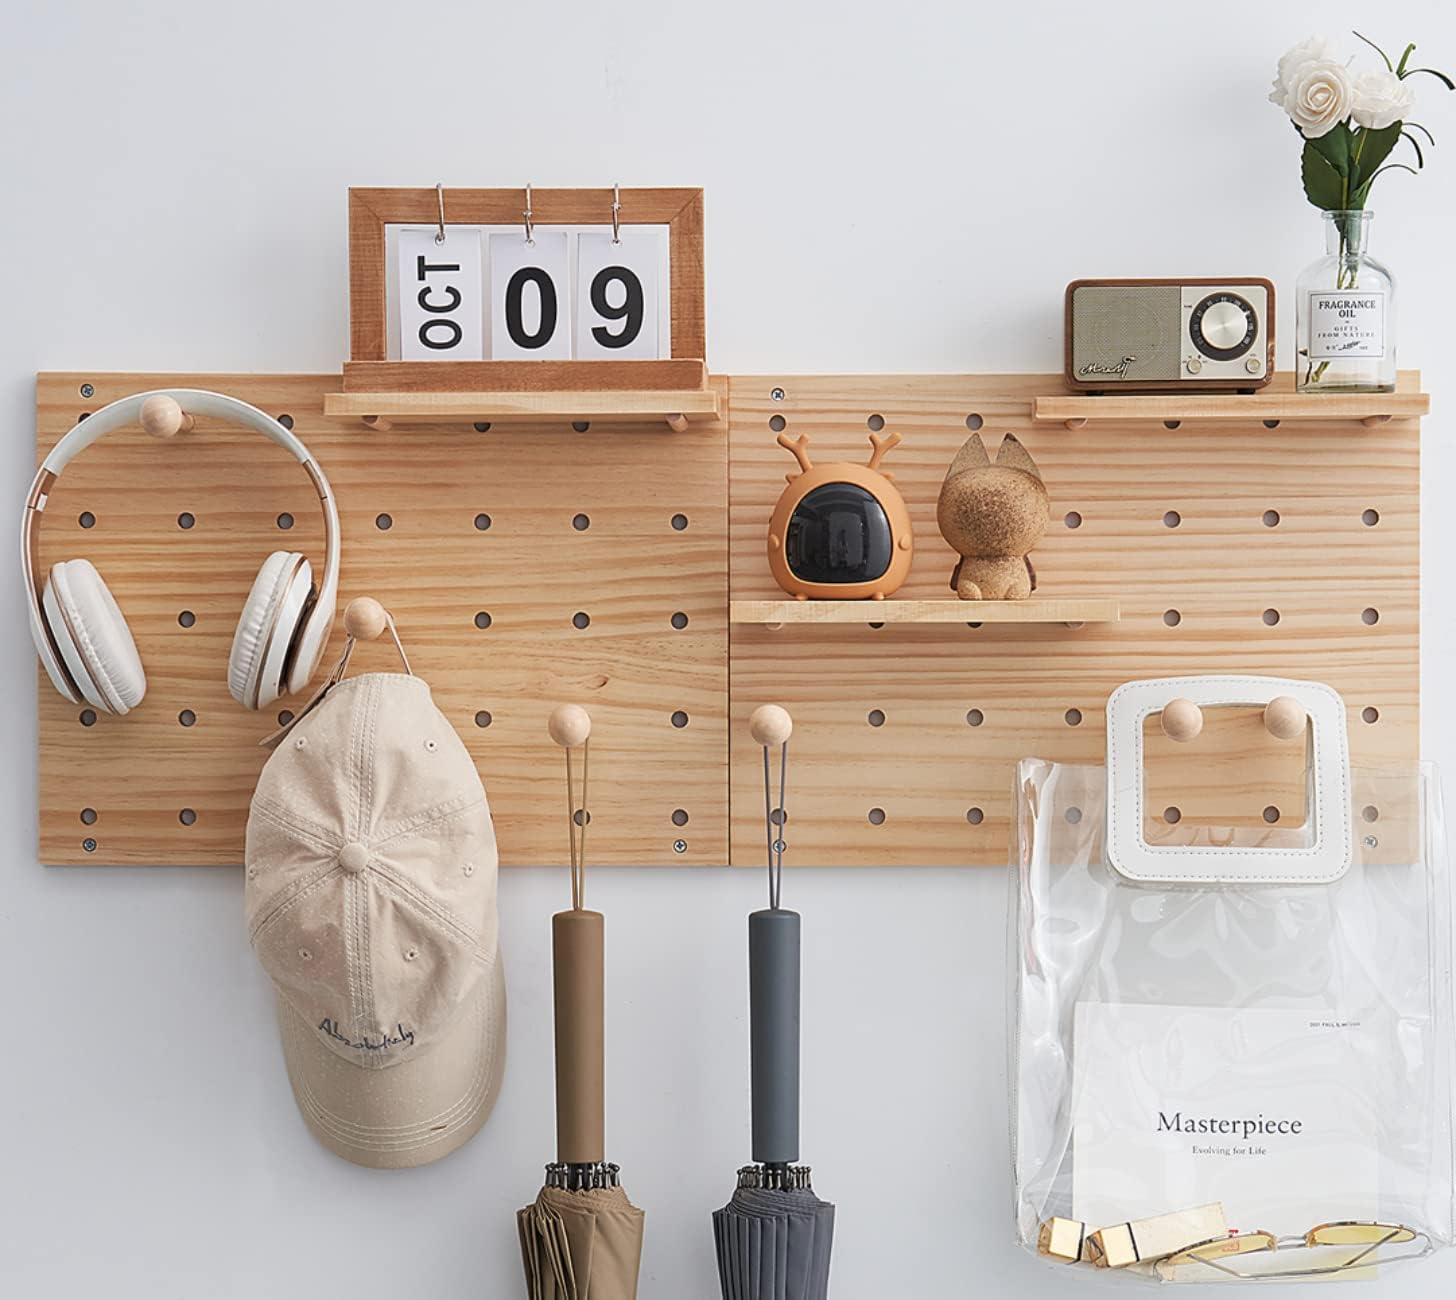 Wooden Pegboard for kits